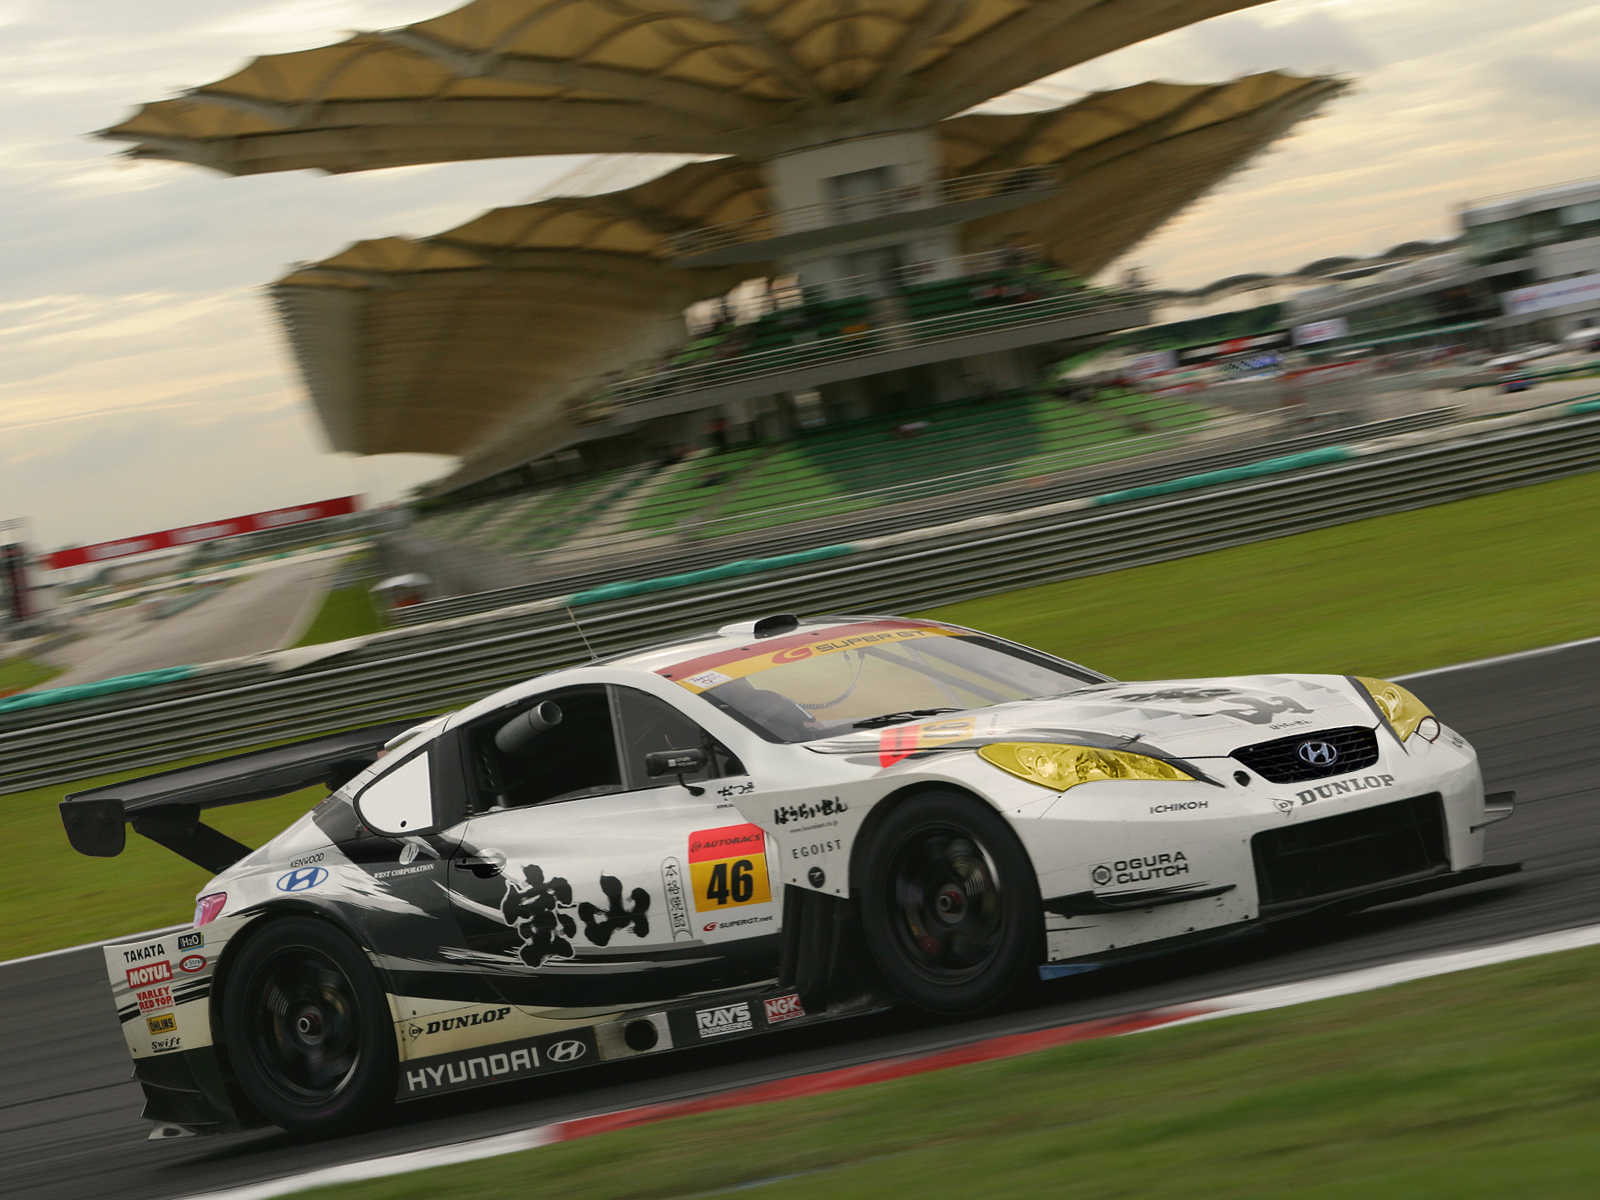 Hyundai_Coupe_Super_GT_by_AntVR6.jpg